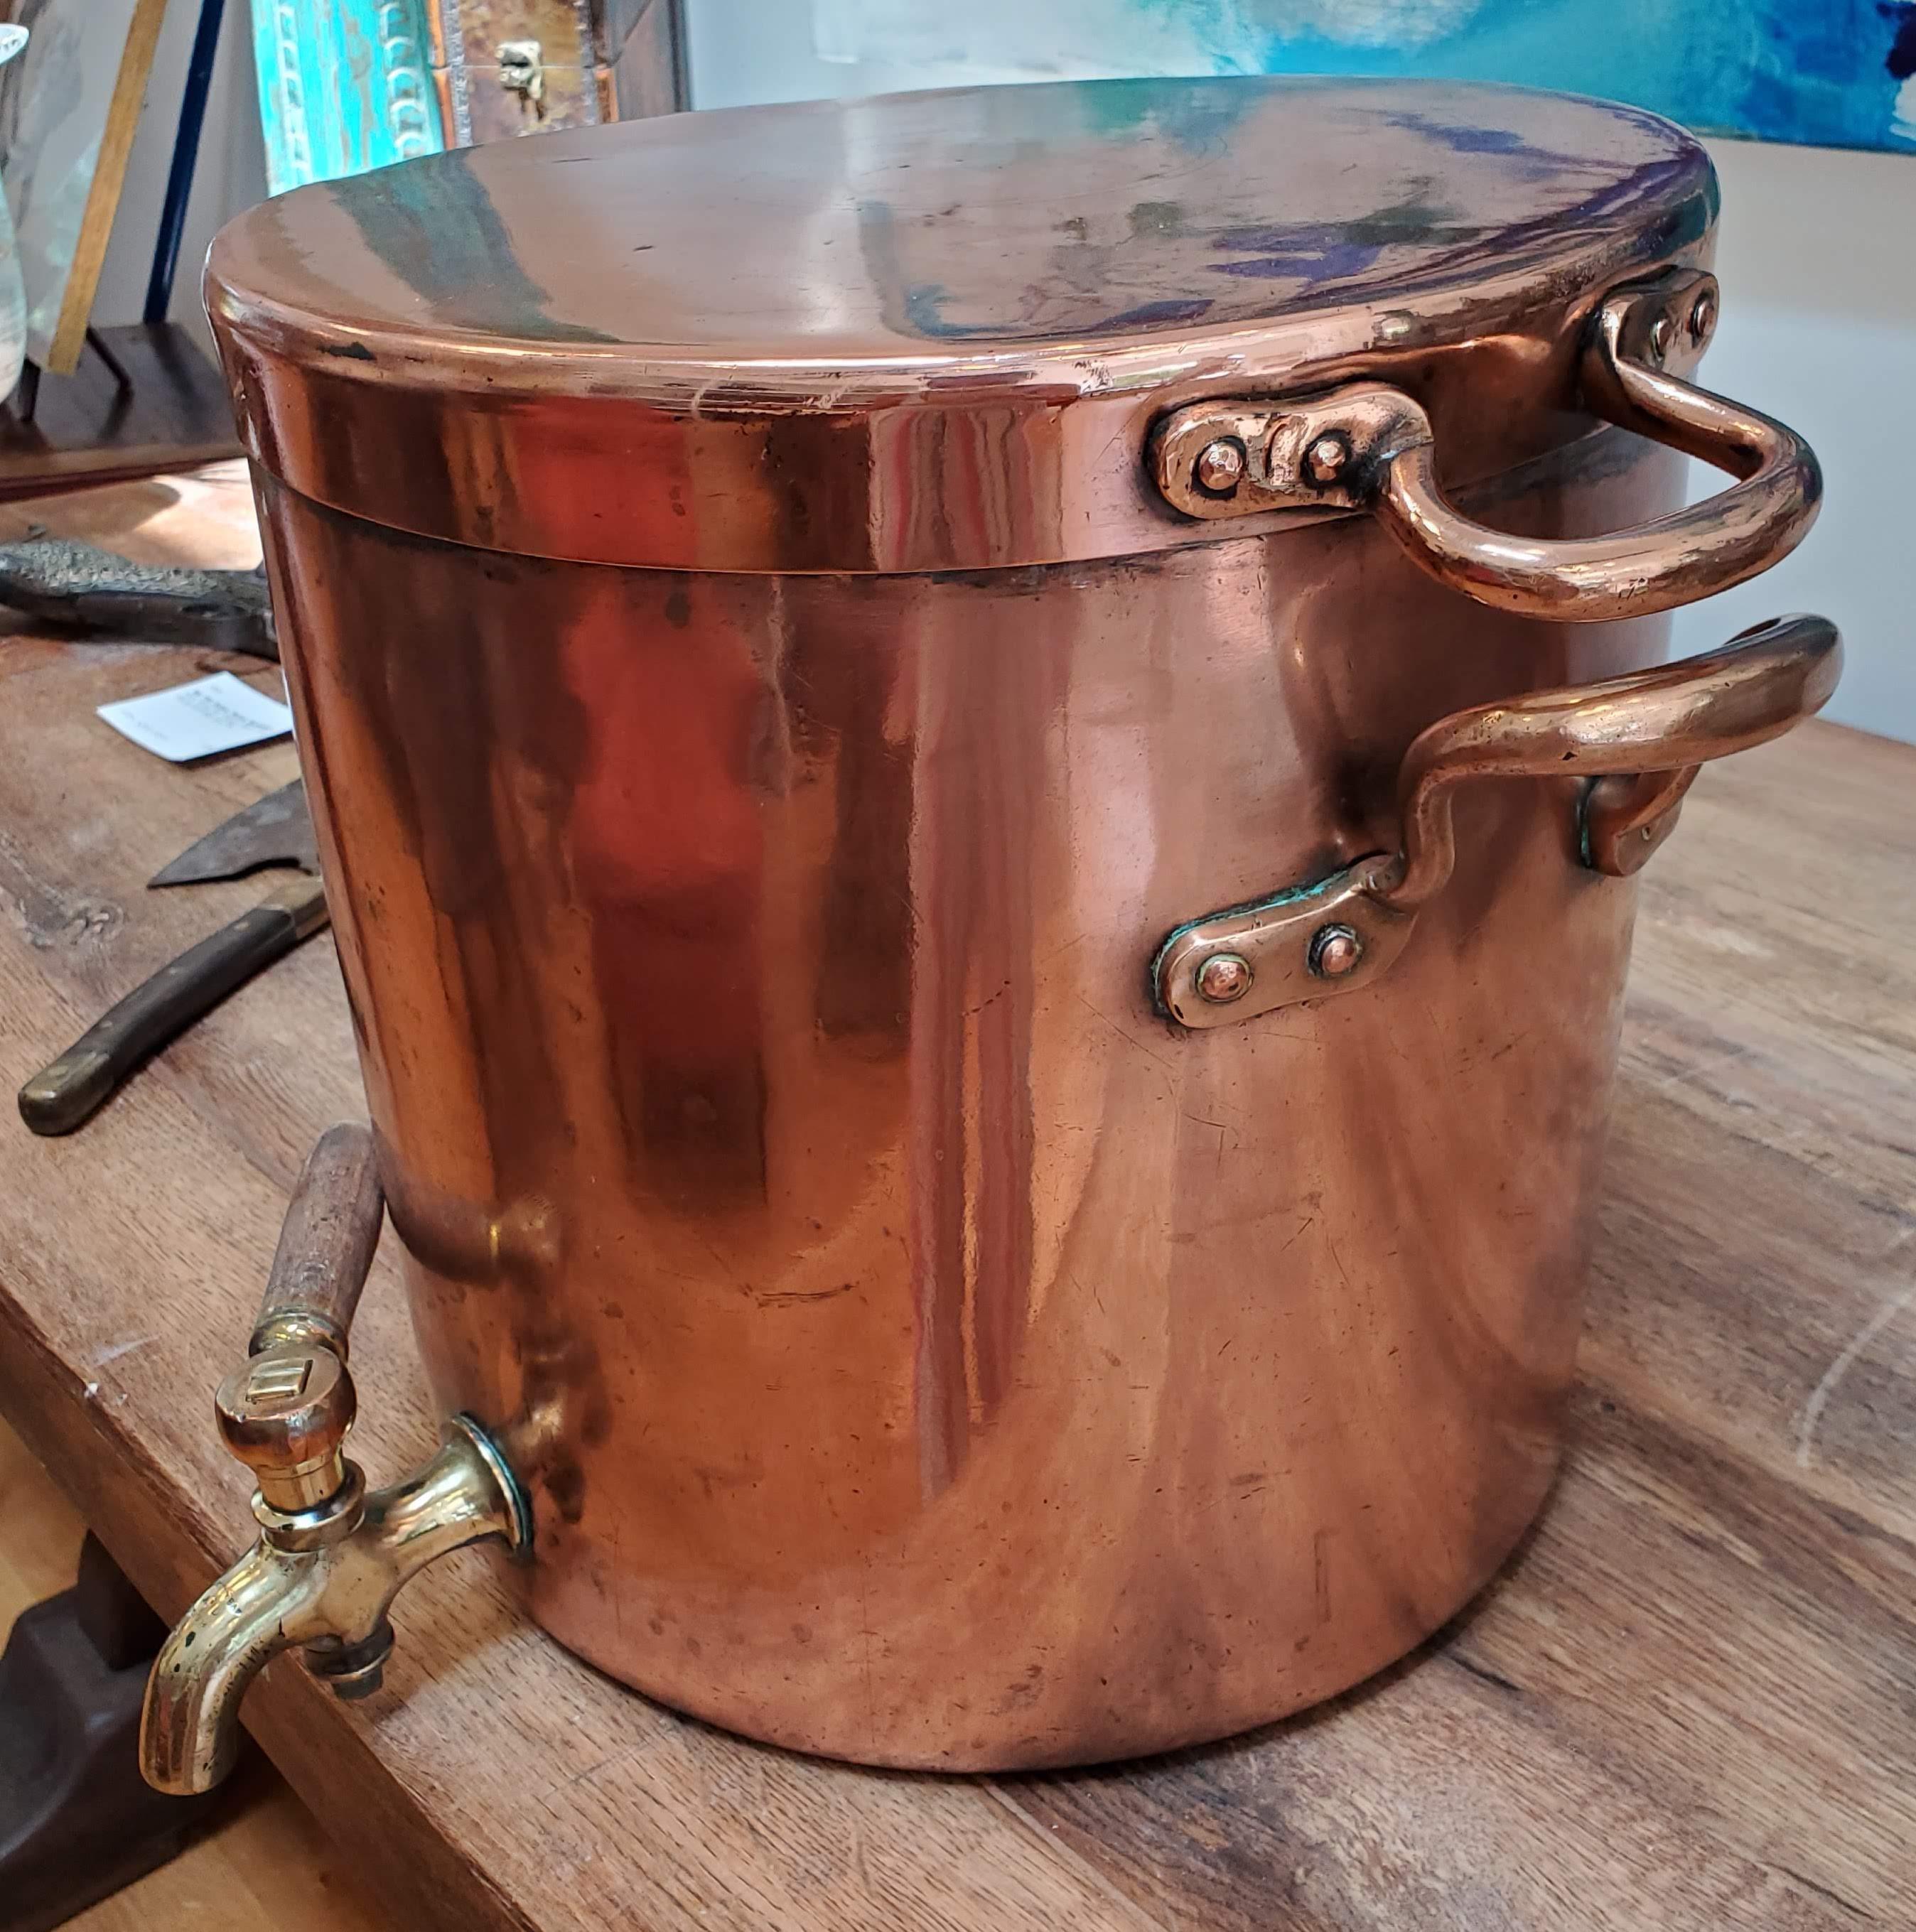 19th Century English Copper Water Dispenser with Brass Spout. Made for use on a ship. Perfect decor for a bar, tasting room, restaurant or large kitchen.
England, circa 1880.
Measures: 12” H 12.5” Dm.